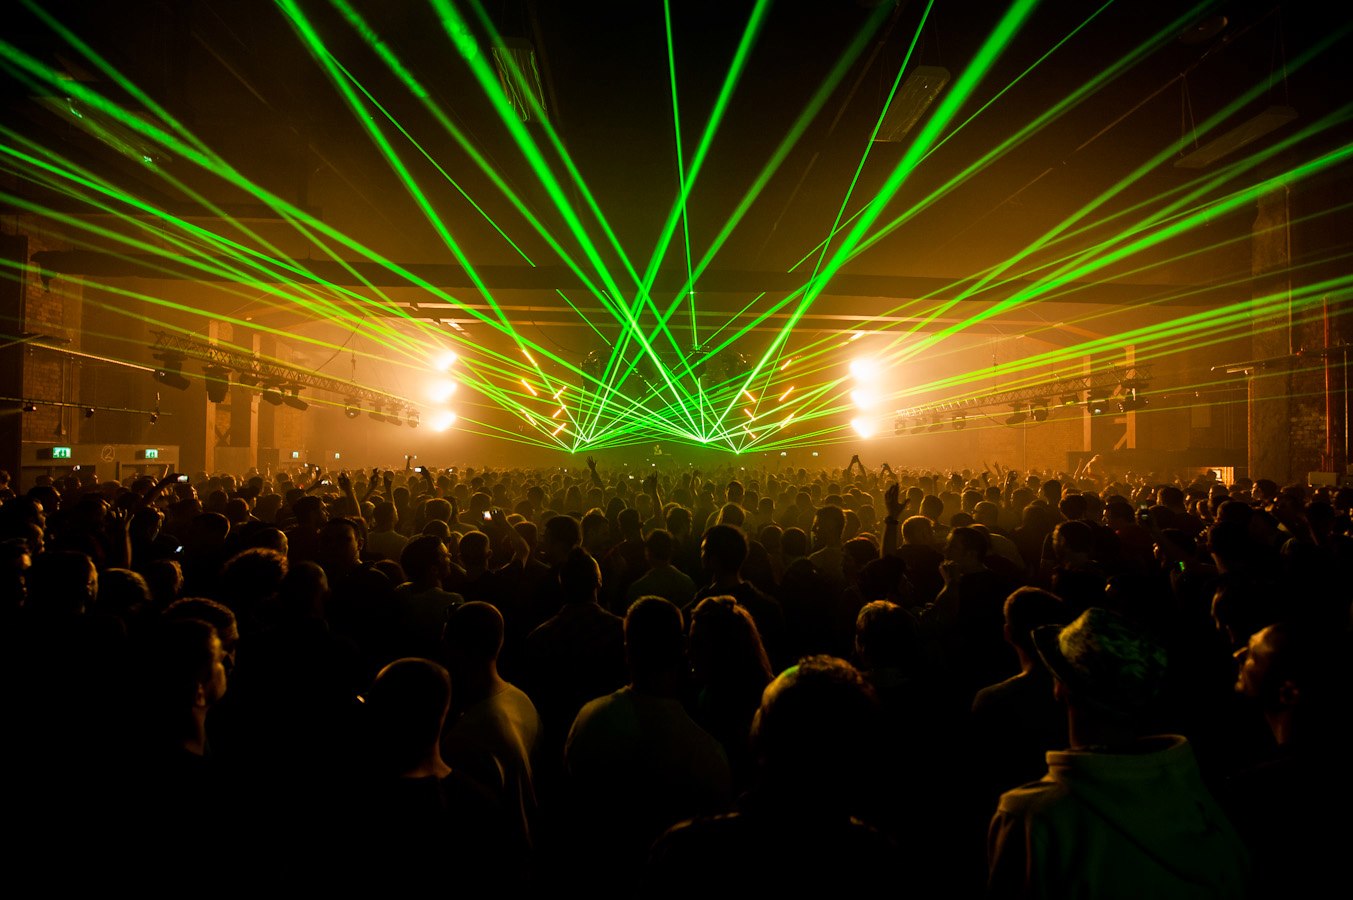 Manchester’s Warehouse Project returns to iconic venue